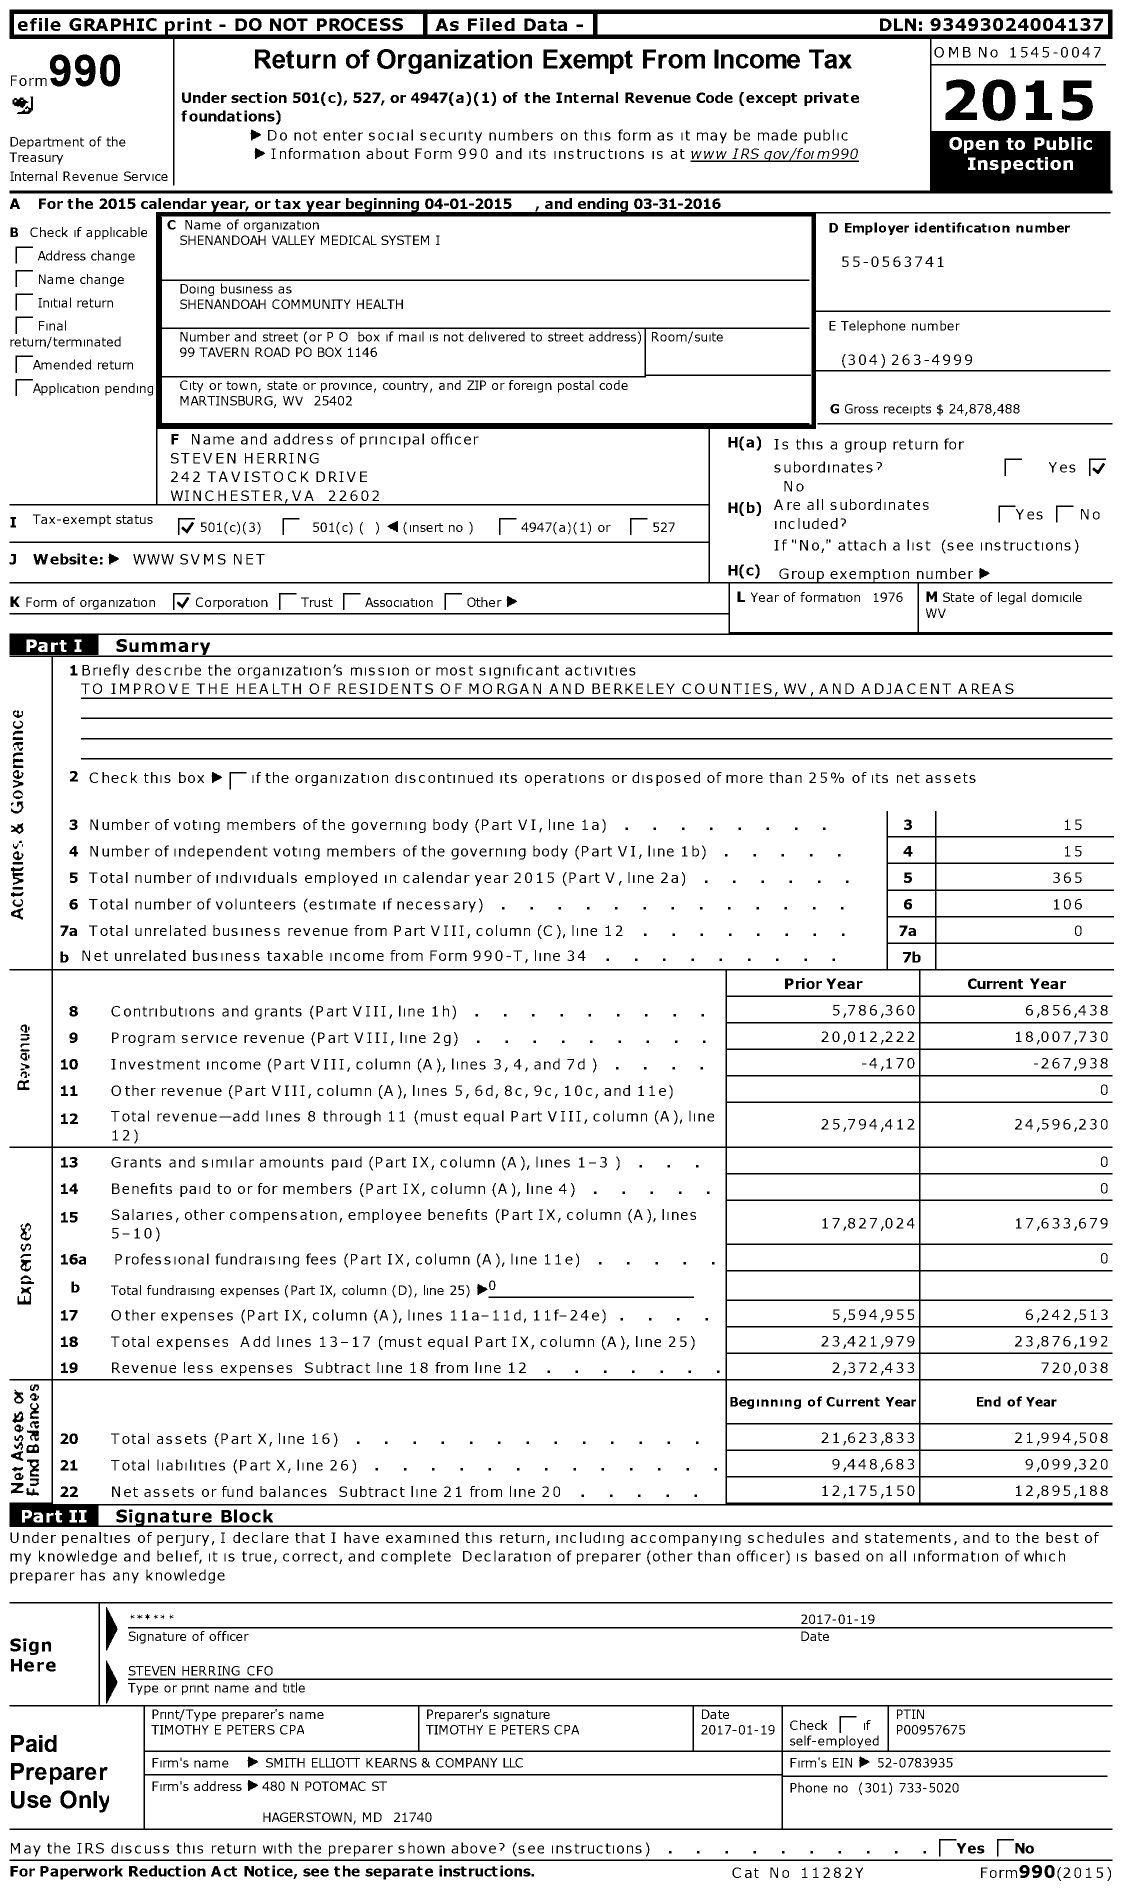 Image of first page of 2015 Form 990 for Shenandoah Community Health (SCH)